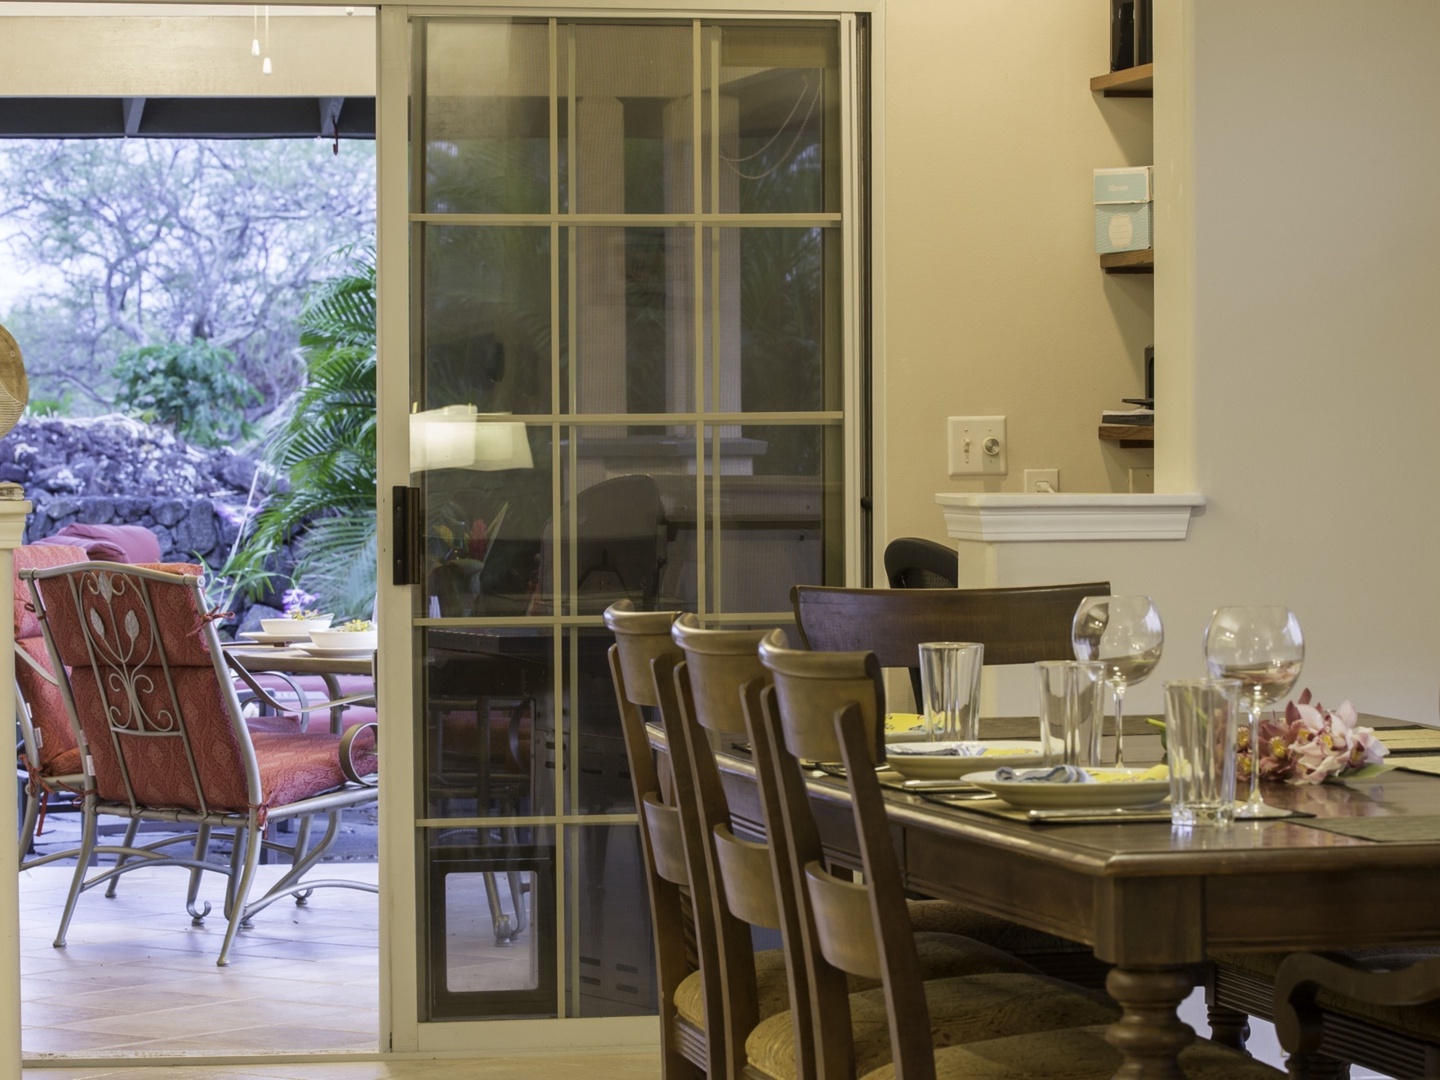 Kailua Kona Vacation Rentals, Hale Alaula - Ocean View - Dining area with direct access to the lanai.